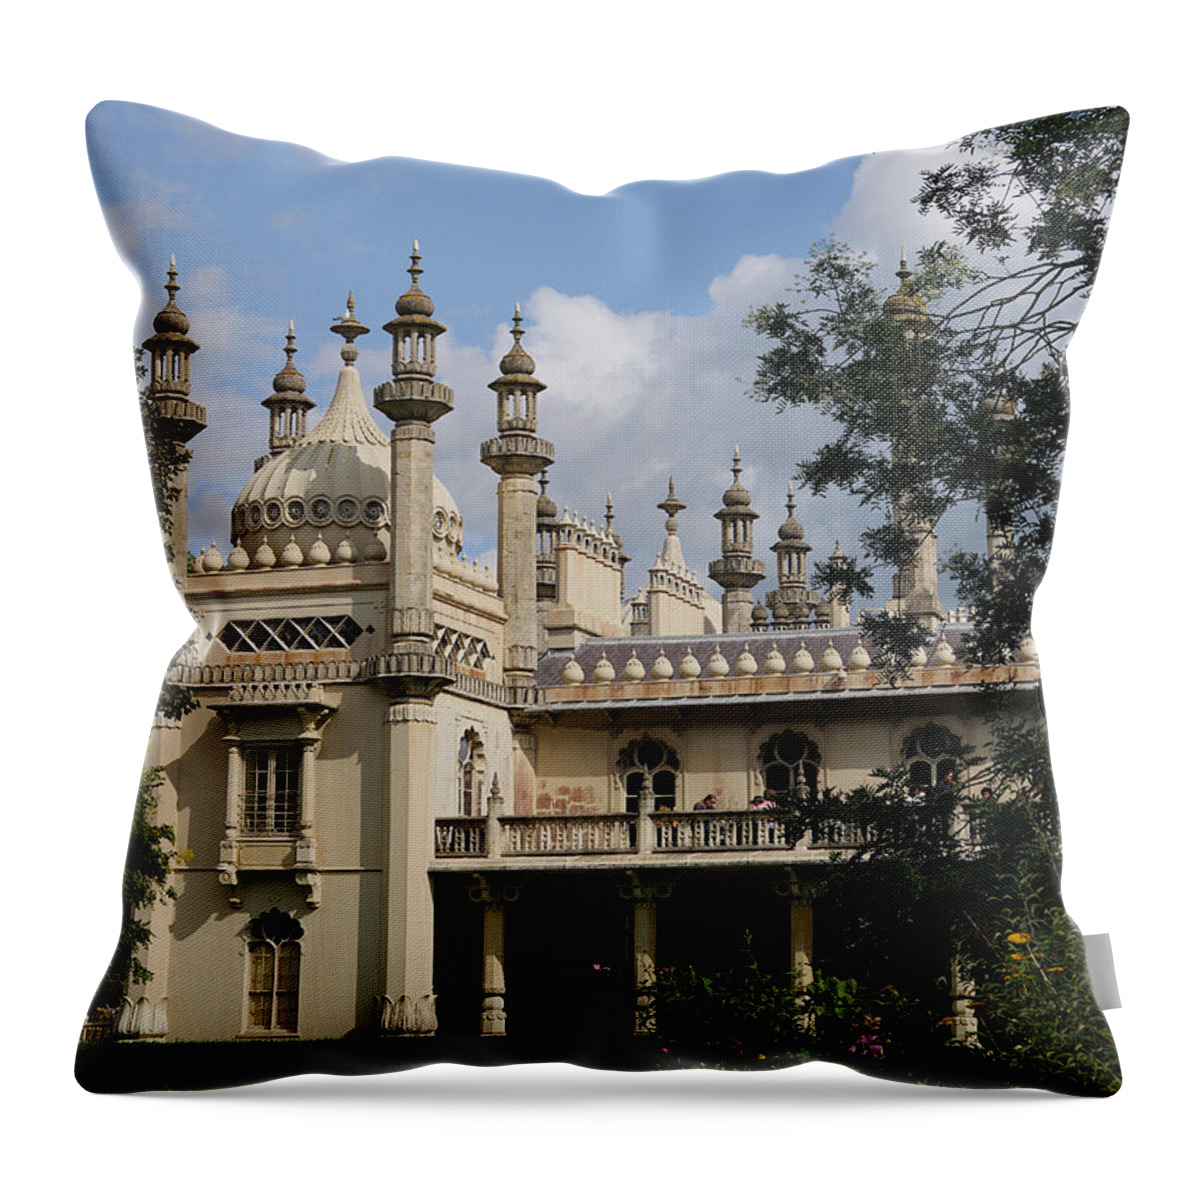 Richard Reeve Throw Pillow featuring the photograph Brighton Royal Pavilion 1 by Richard Reeve